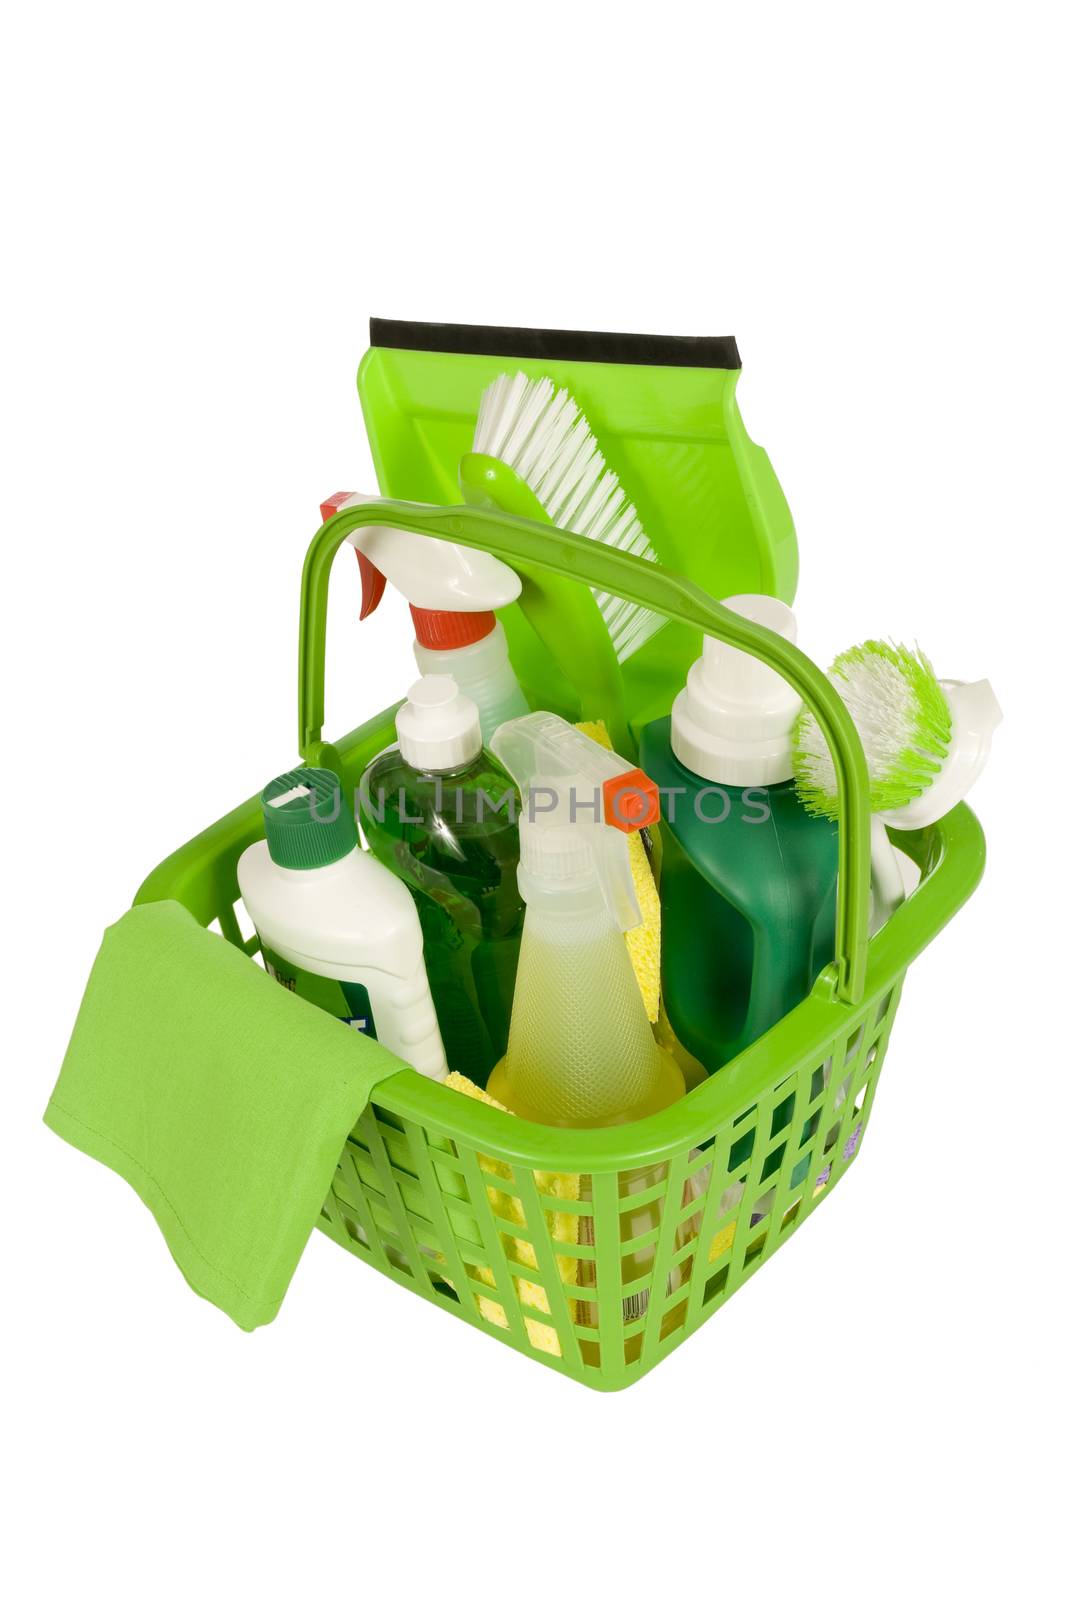 Green Cleaning Supplies by stockbuster1